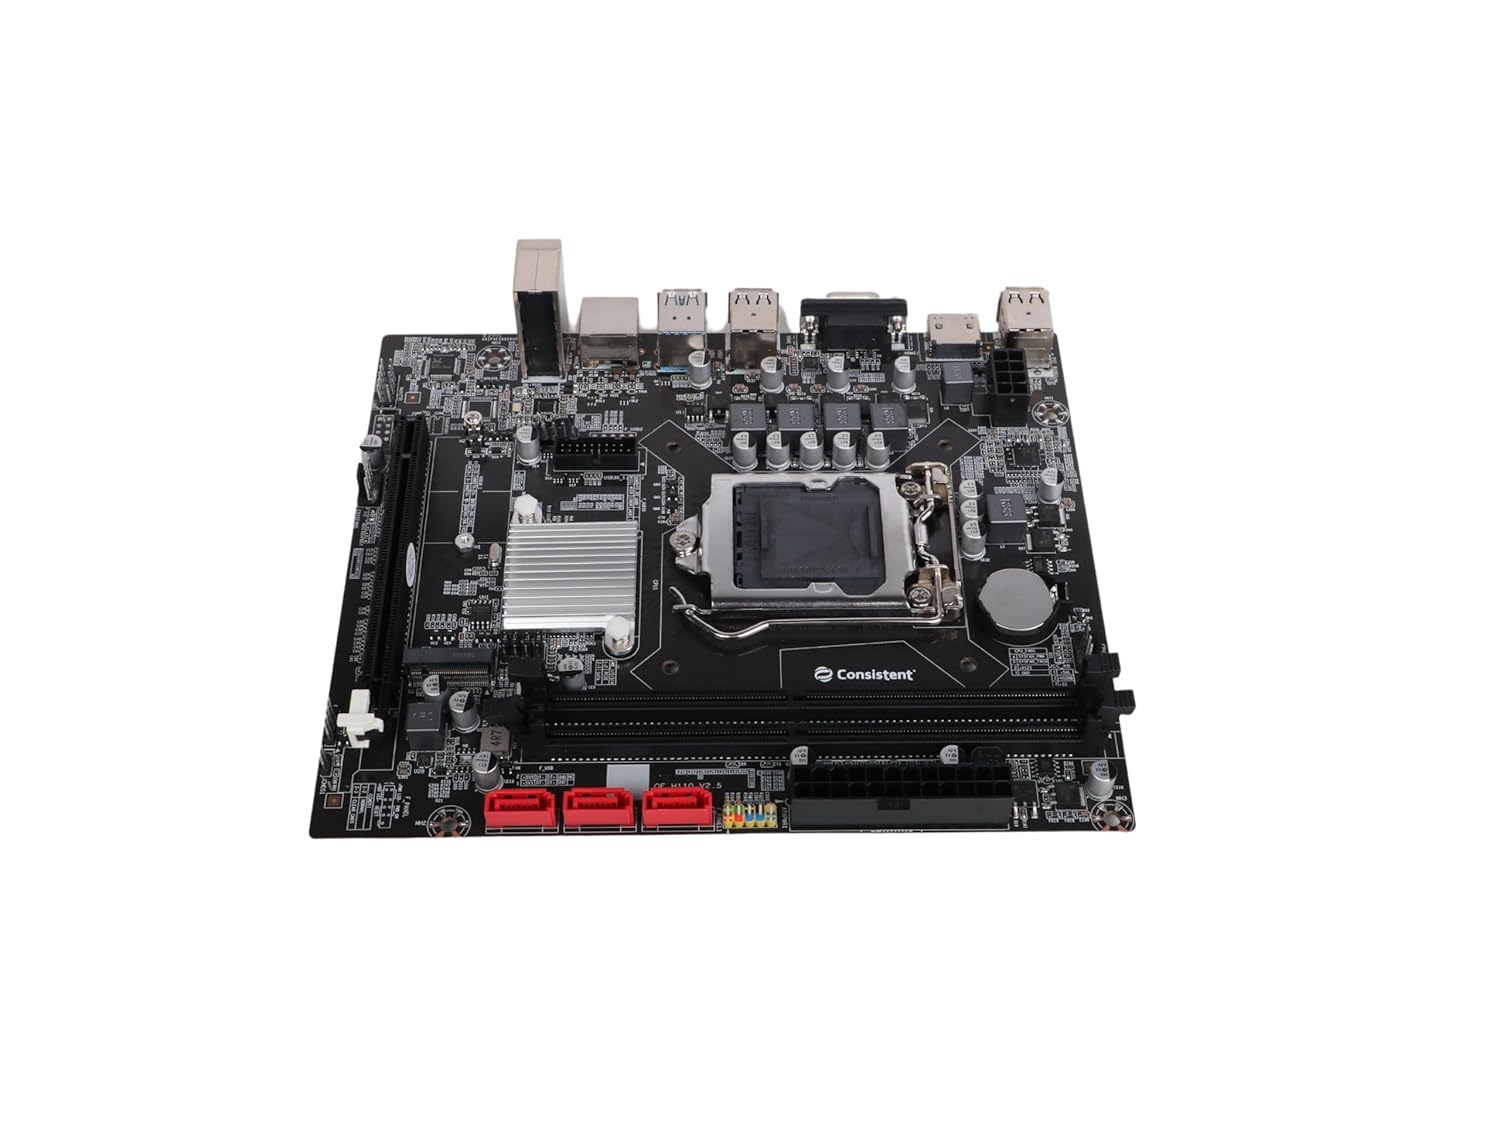 Consistent H-110 Motherboard 6th,7th Gen i3, i5, i7, DDR4 Slots for RAM | GMA 950 Graphic Card, Motherboard | Sound Card, SATA 2&3, 3Y Warranty